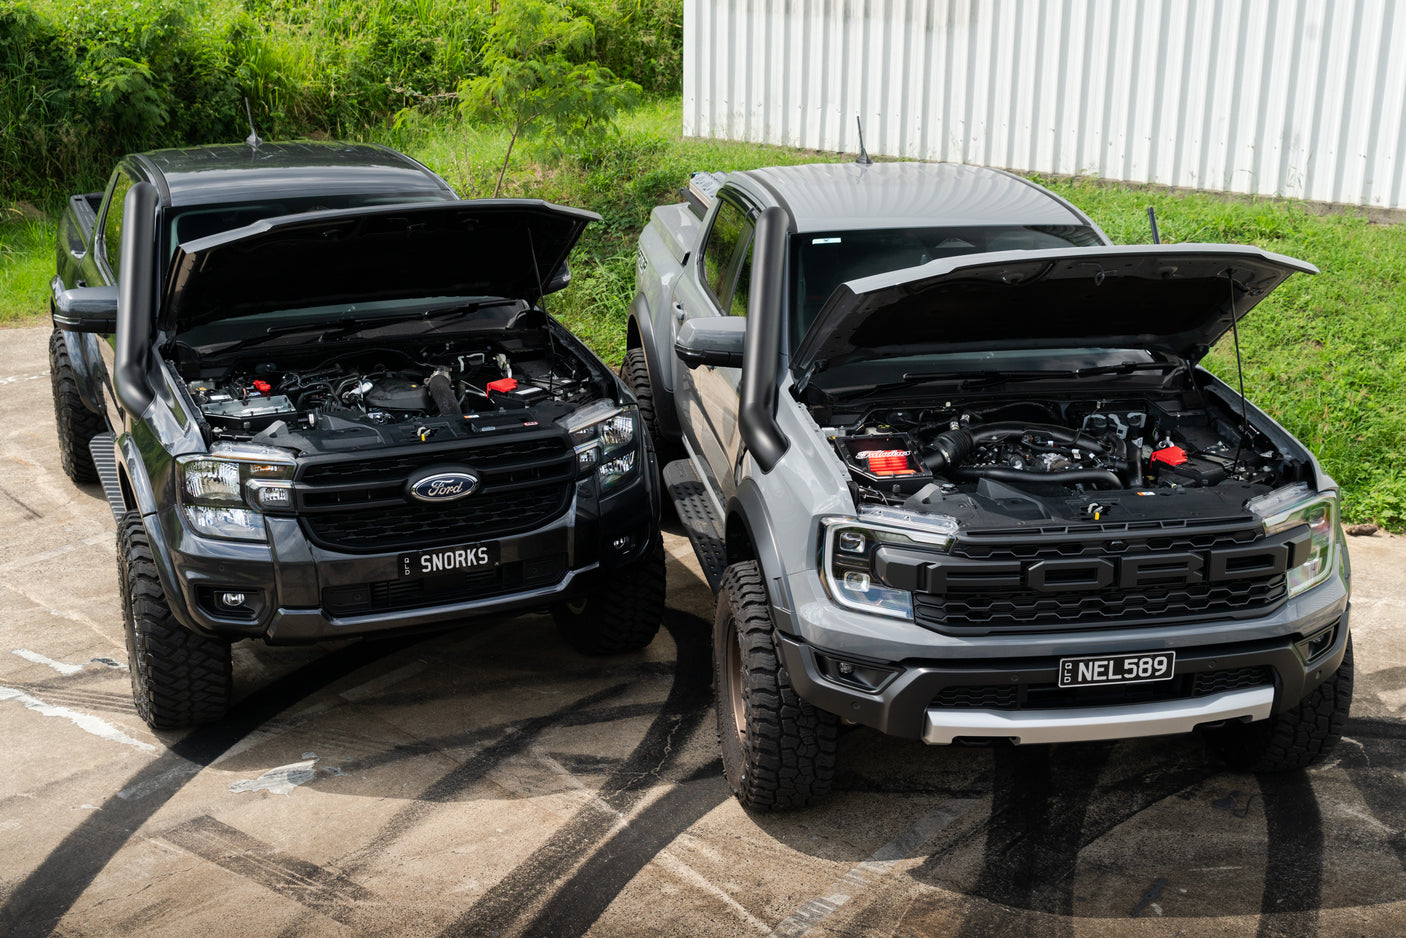 Ford Ranger Raptor Next Gen 5 Inch Stainless Snorkel and Twin Intake Alloy Airbox Kit